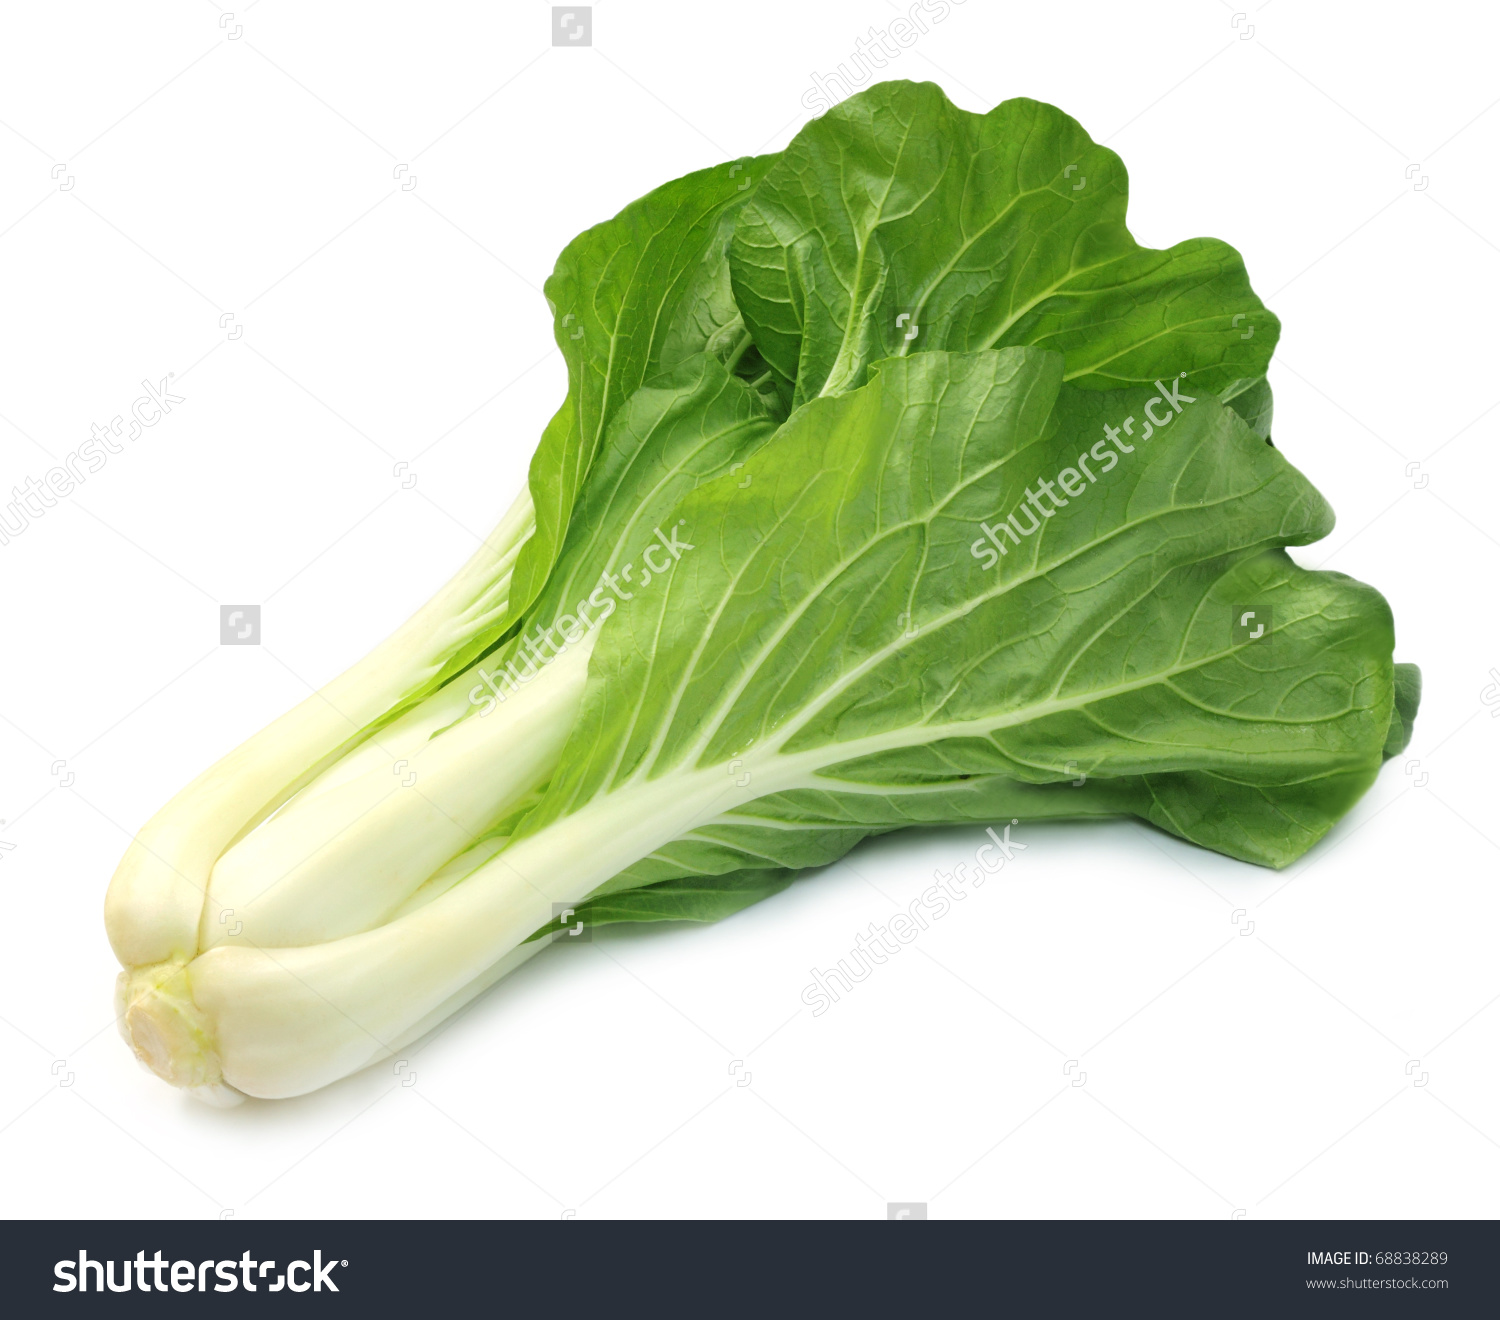 Cabbage petchay